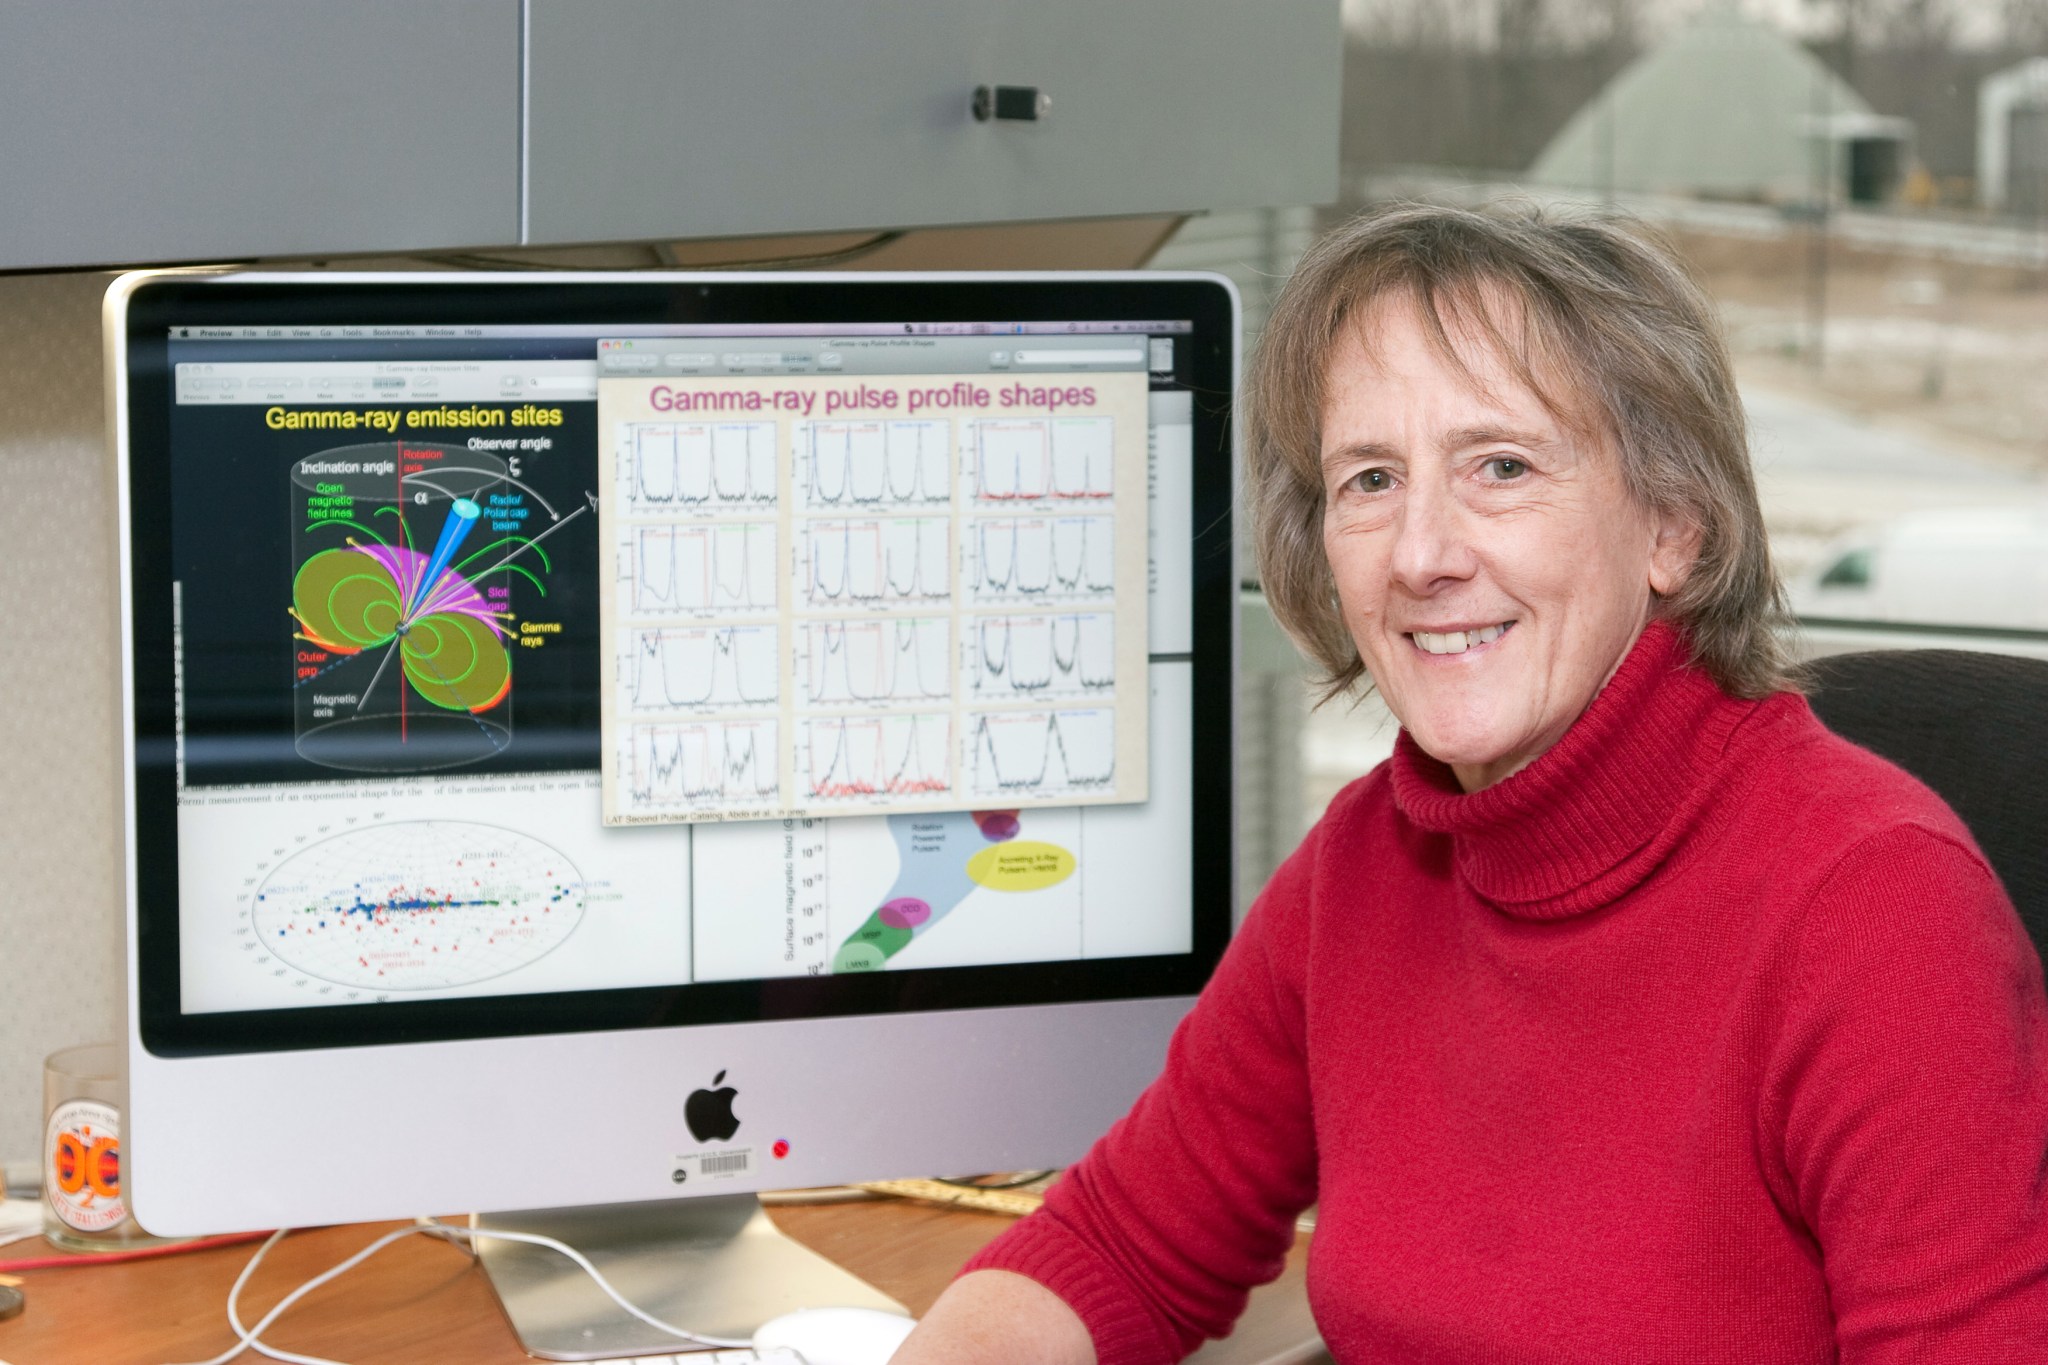 At left is a computer screen with information about pulsars. At right sits a a woman in a red pullover top facing the camera.